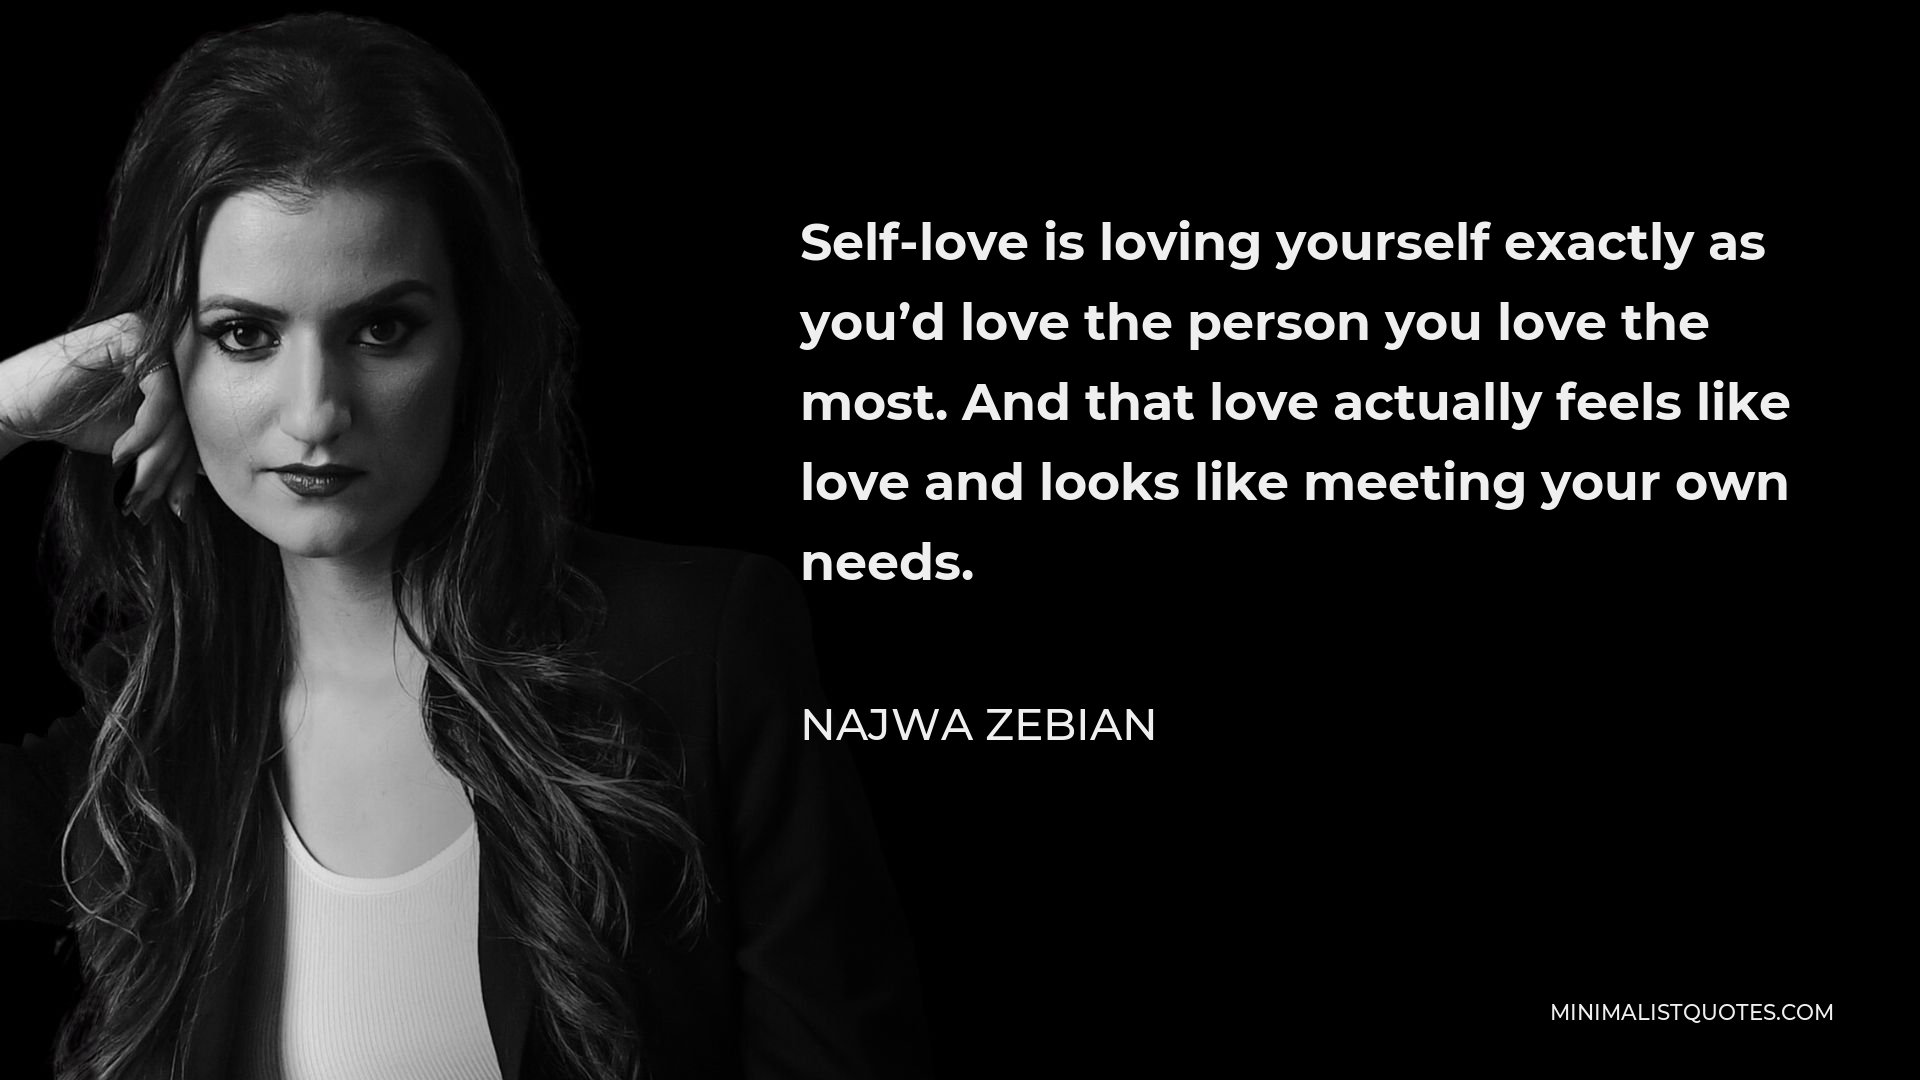 Najwa Zebian Quote - Self-love is loving yourself exactly as you’d love the person you love the most. And that love actually feels like love and looks like meeting your own needs.